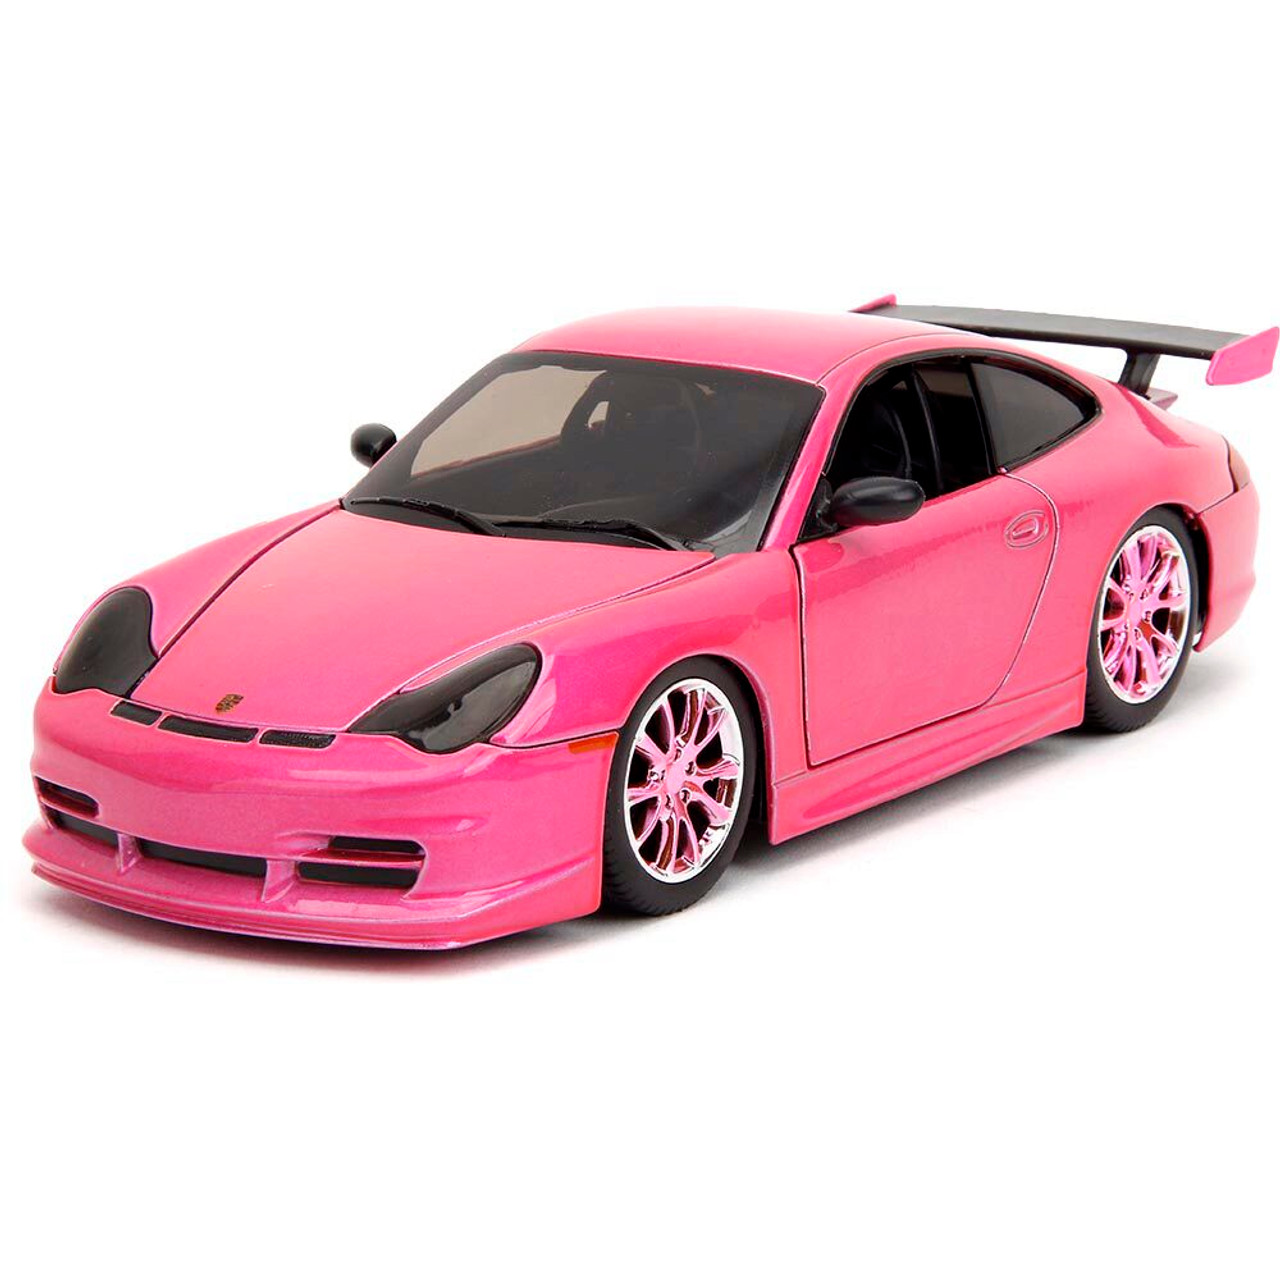 Porsche 911 GT3 RS - Pink Slips 1:24 Scale Diecast Model Car by Jada Toys